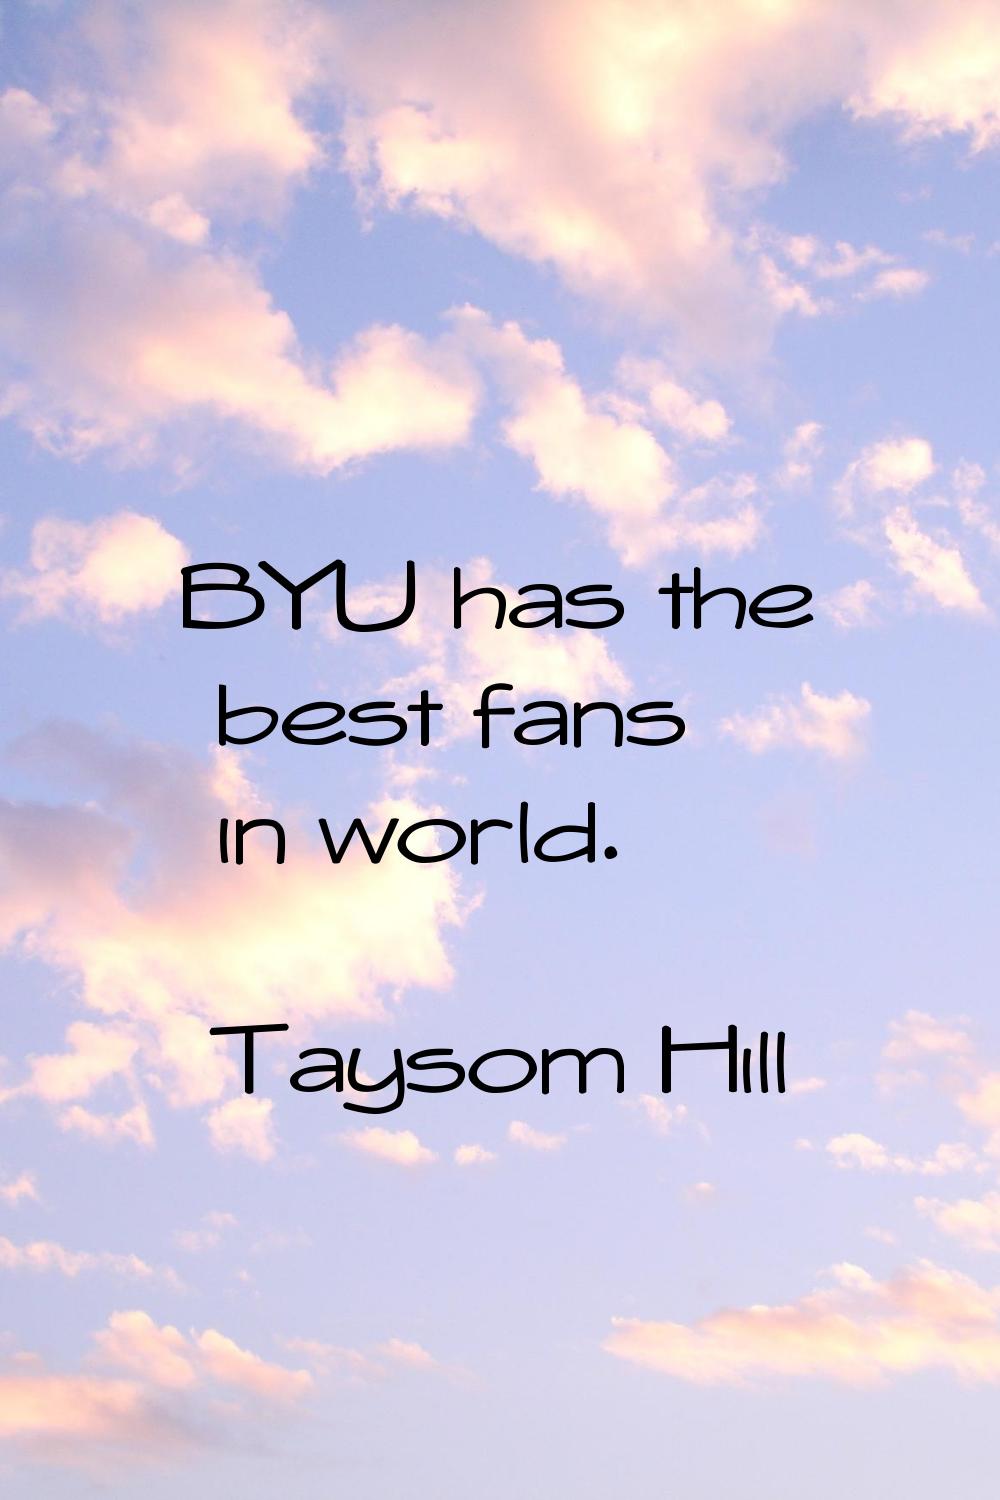 BYU has the best fans in world.